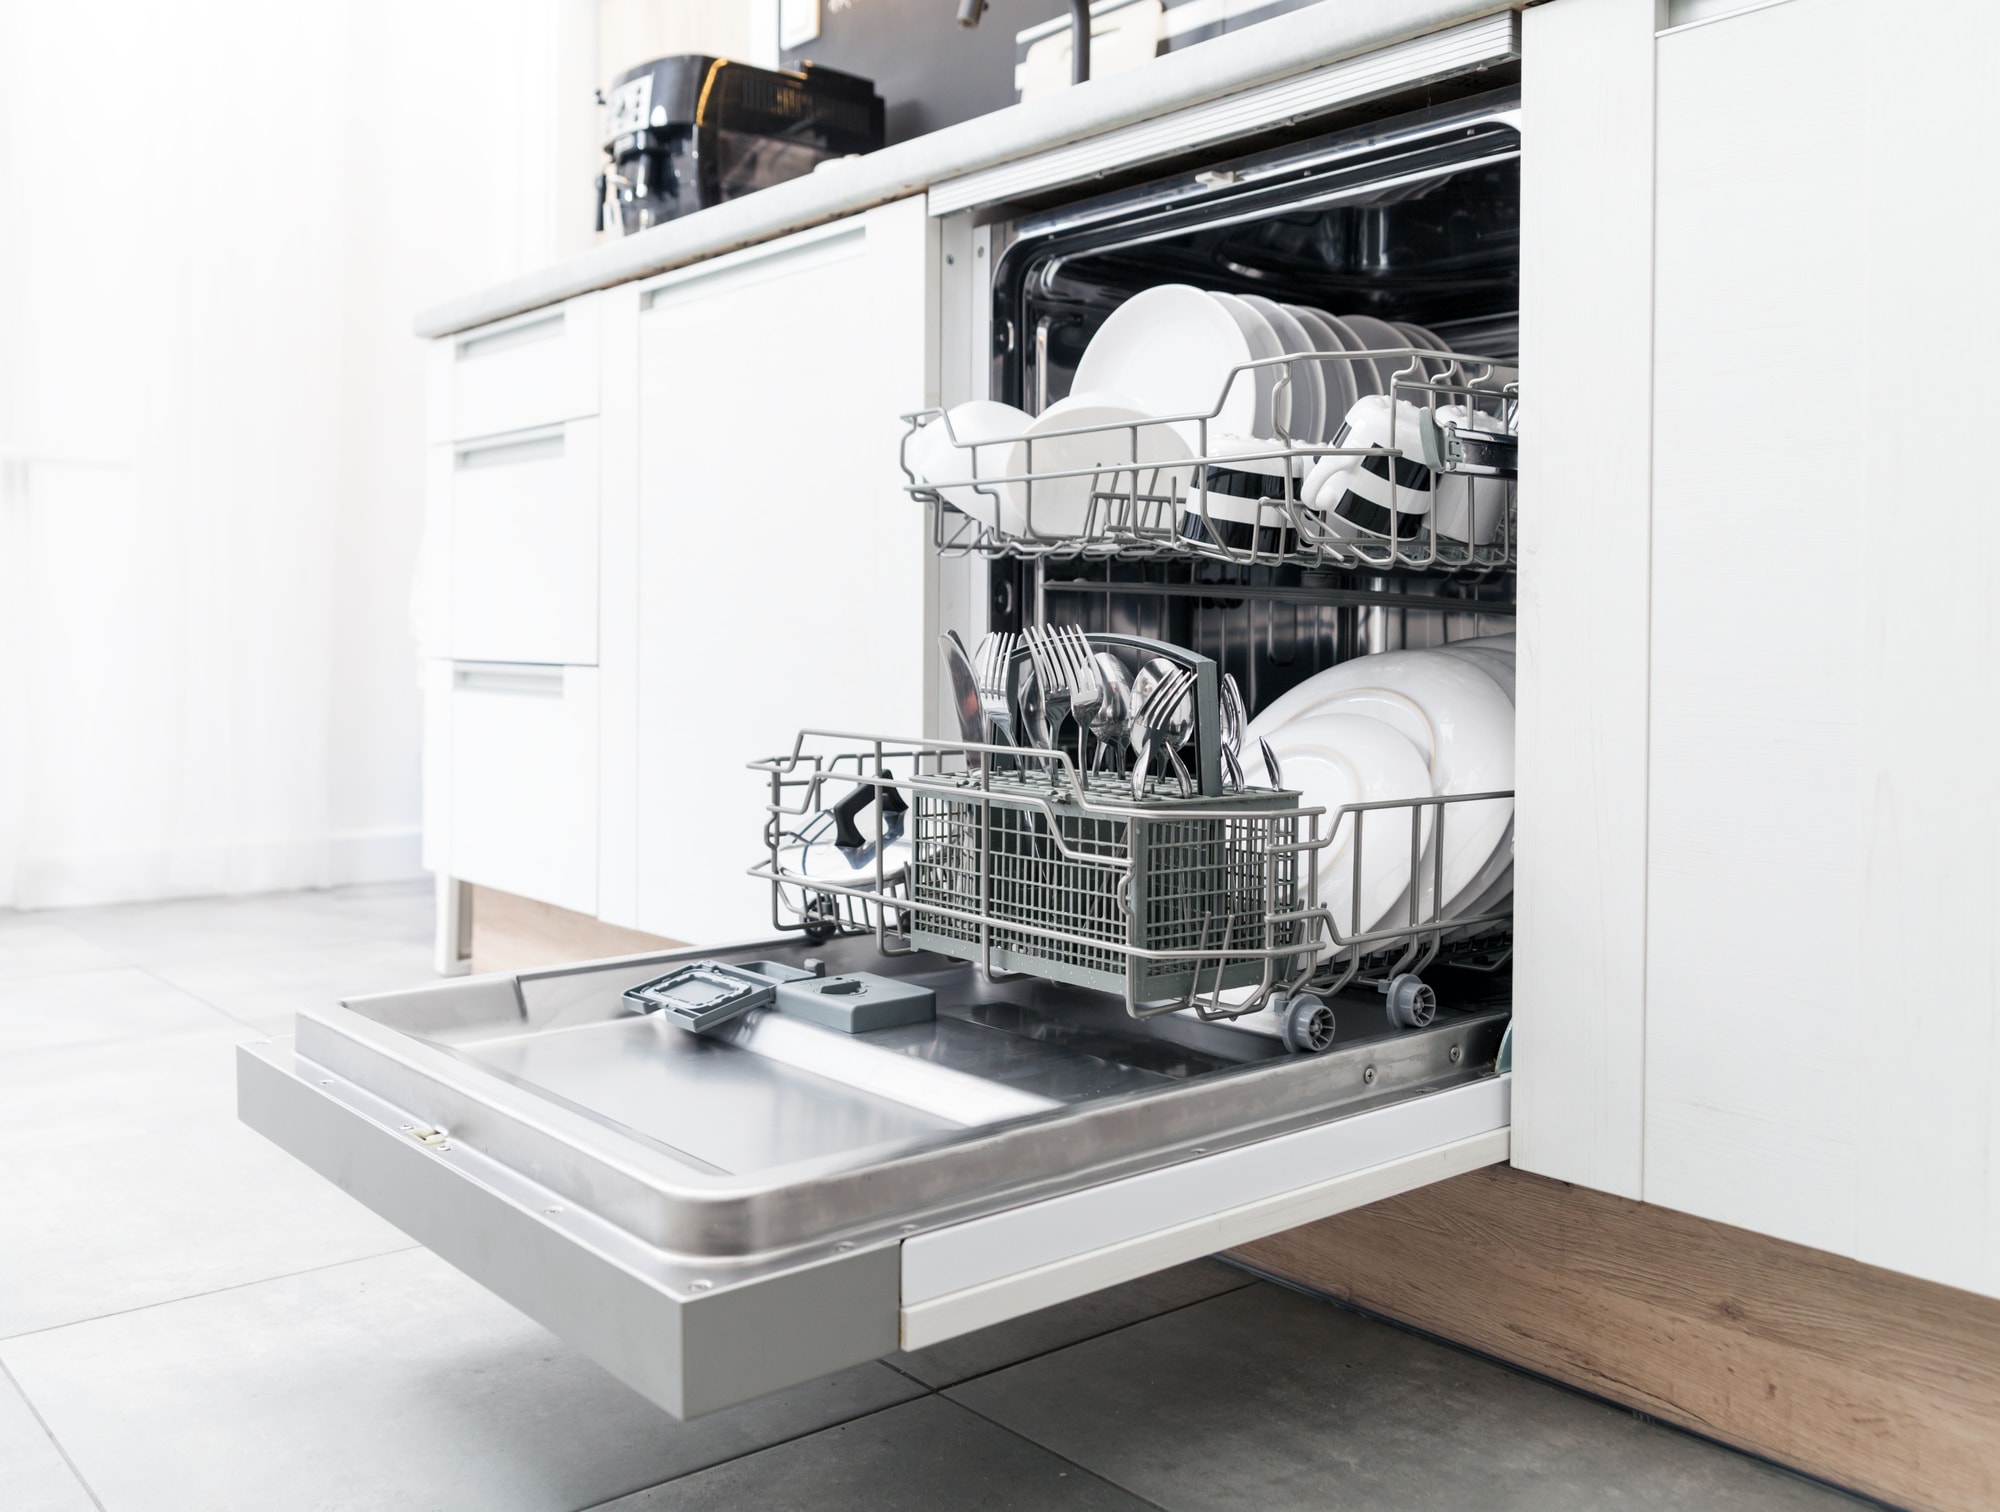 Get professional dishwasher installation and dishwasher repair services to ensure your appliance is properly installed and functioning efficiently.